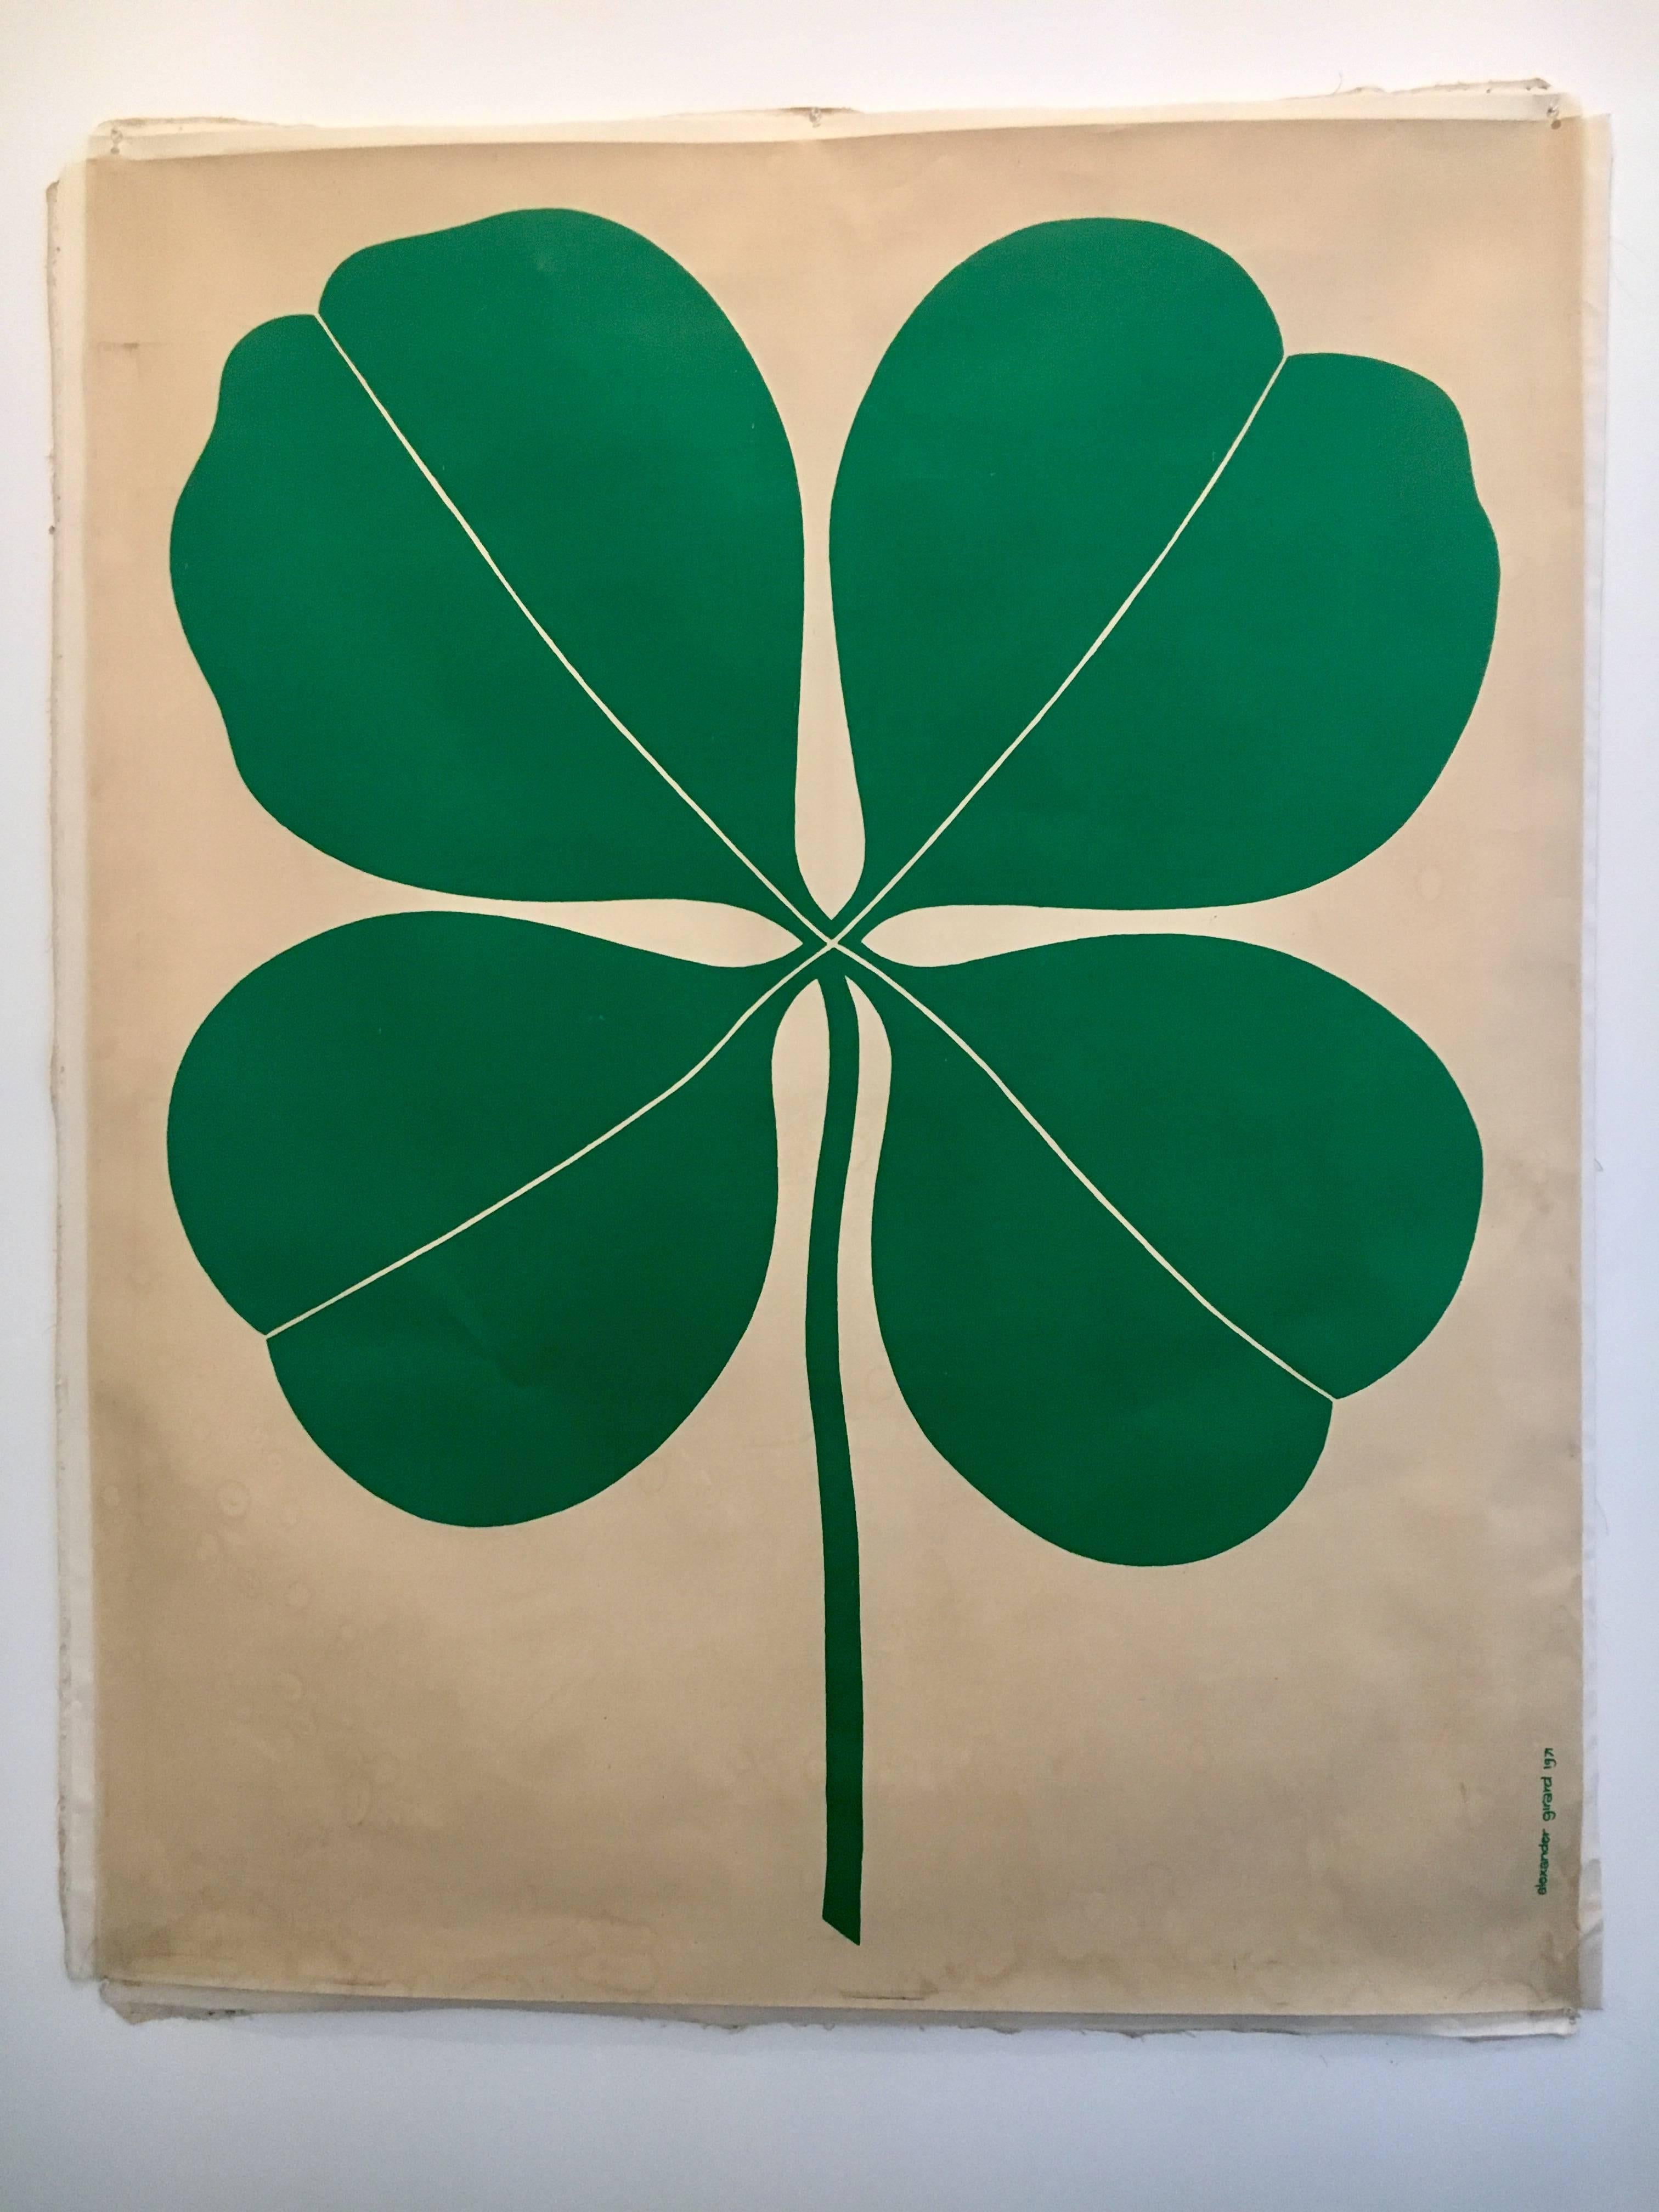 One of Girard's rarest and iconic images, Environmental enrichment panel "Clover" designed by Alexander Girard for Herman Miller in 1972.

           